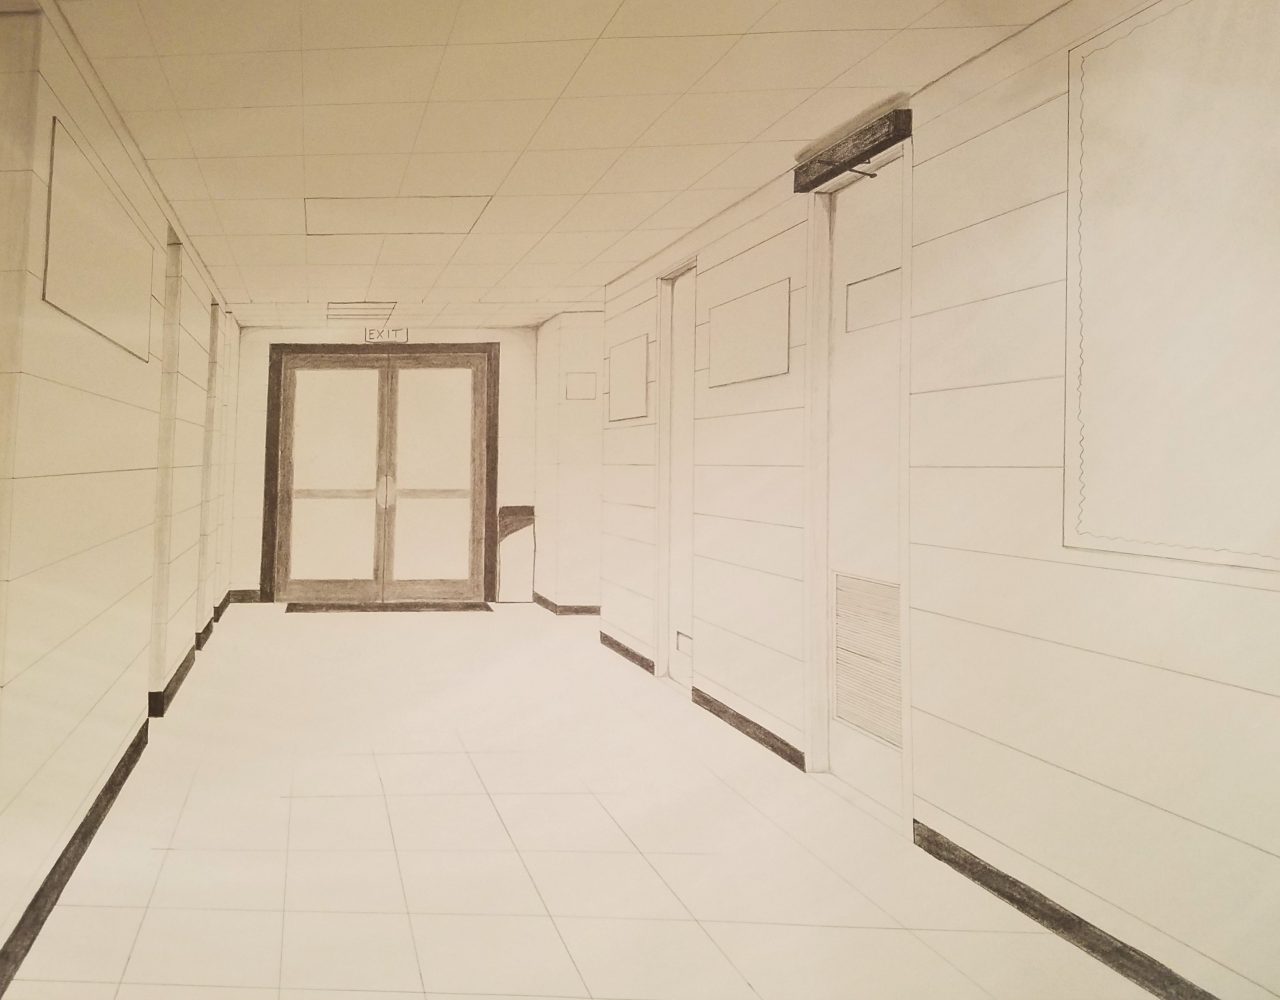 Hallway Perspective Drawing